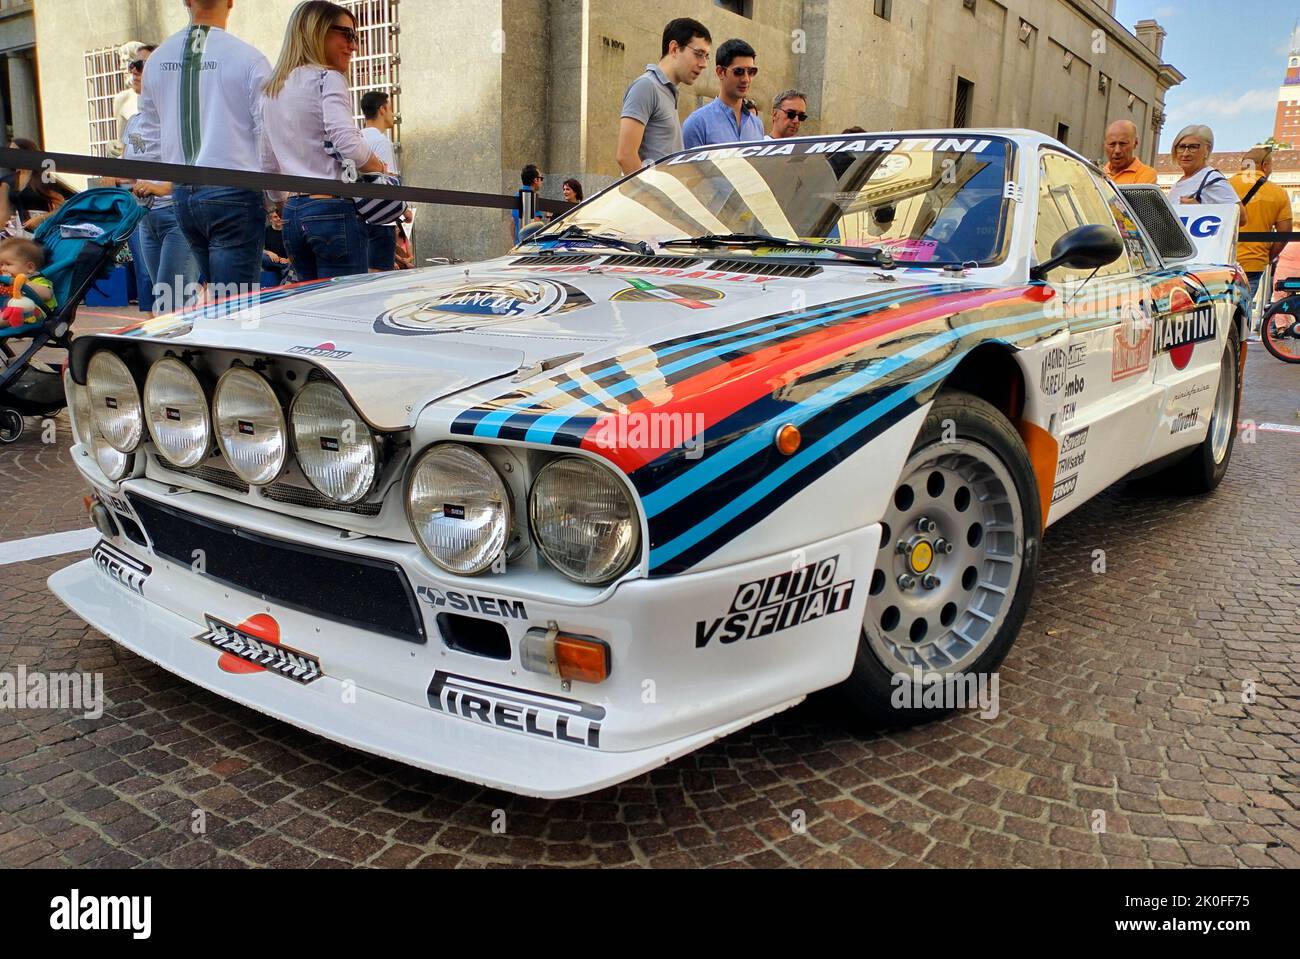 Italie Piémont Turin 'Autolook week Torino' LANCIA RALLY 037 GR.B CERRATO Credit: Realy Easy Star/Alay Live News Banque D'Images